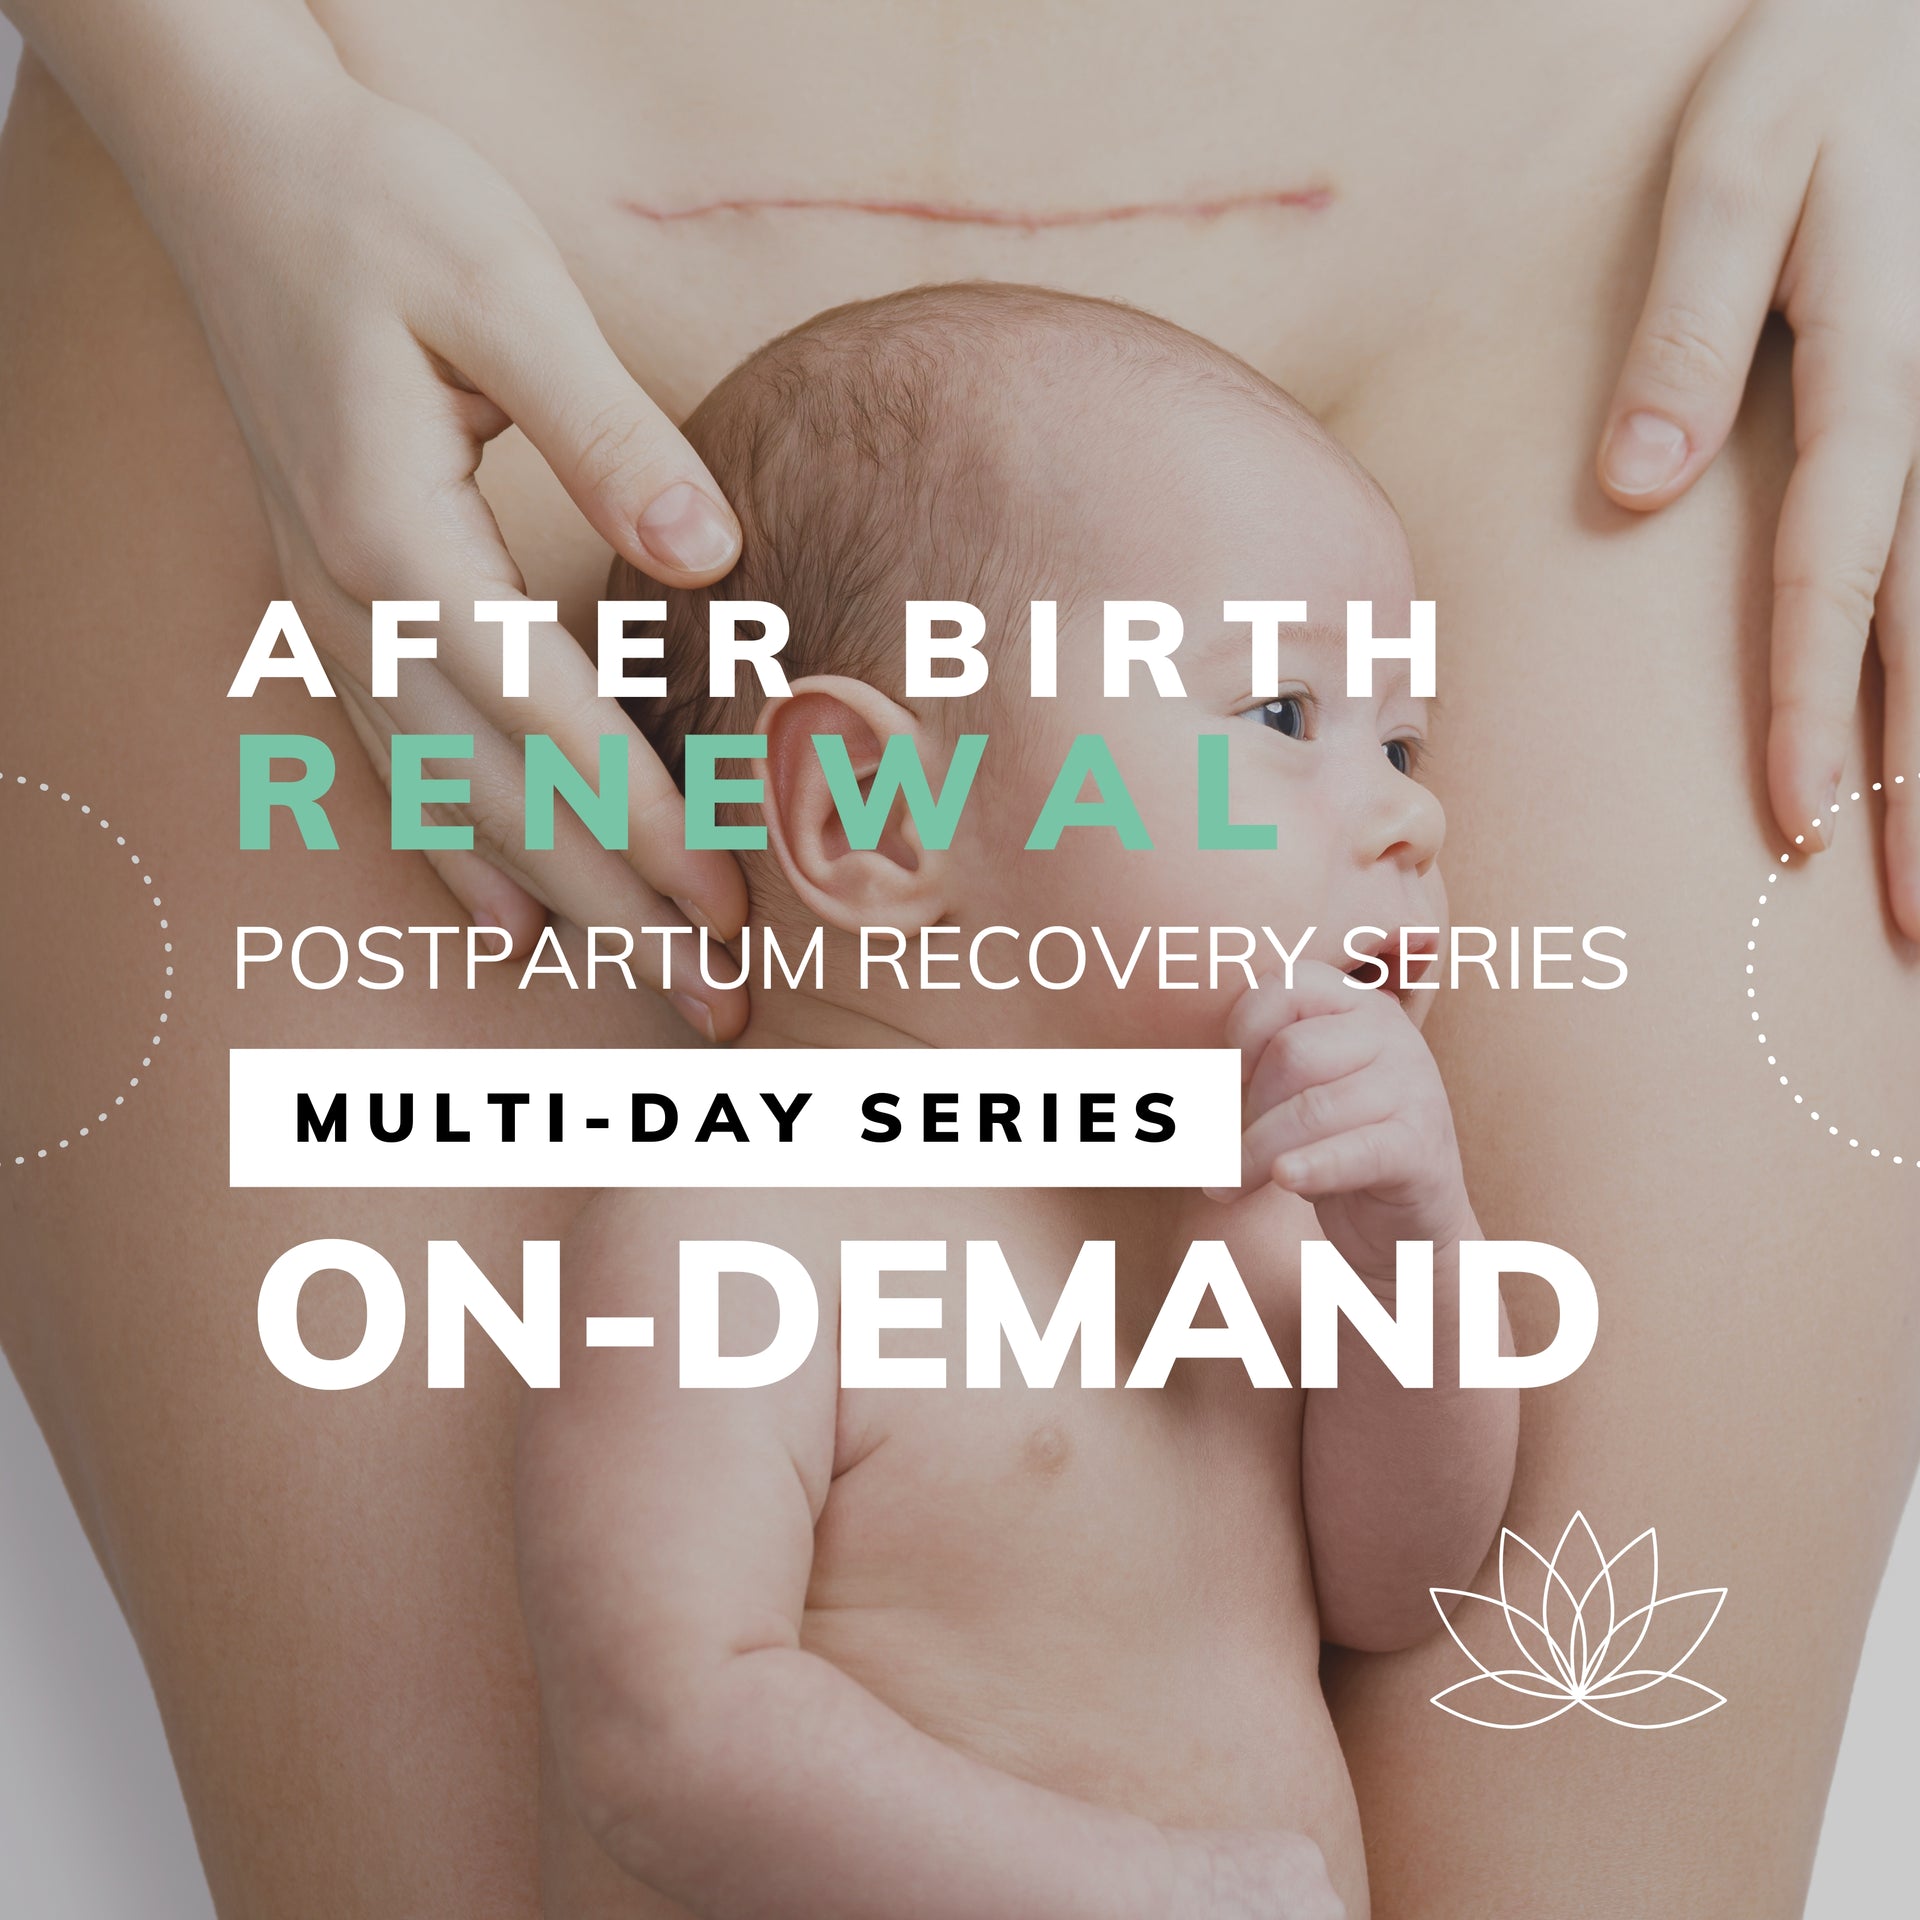 After Birth Renewal: Postpartum Recovery Series